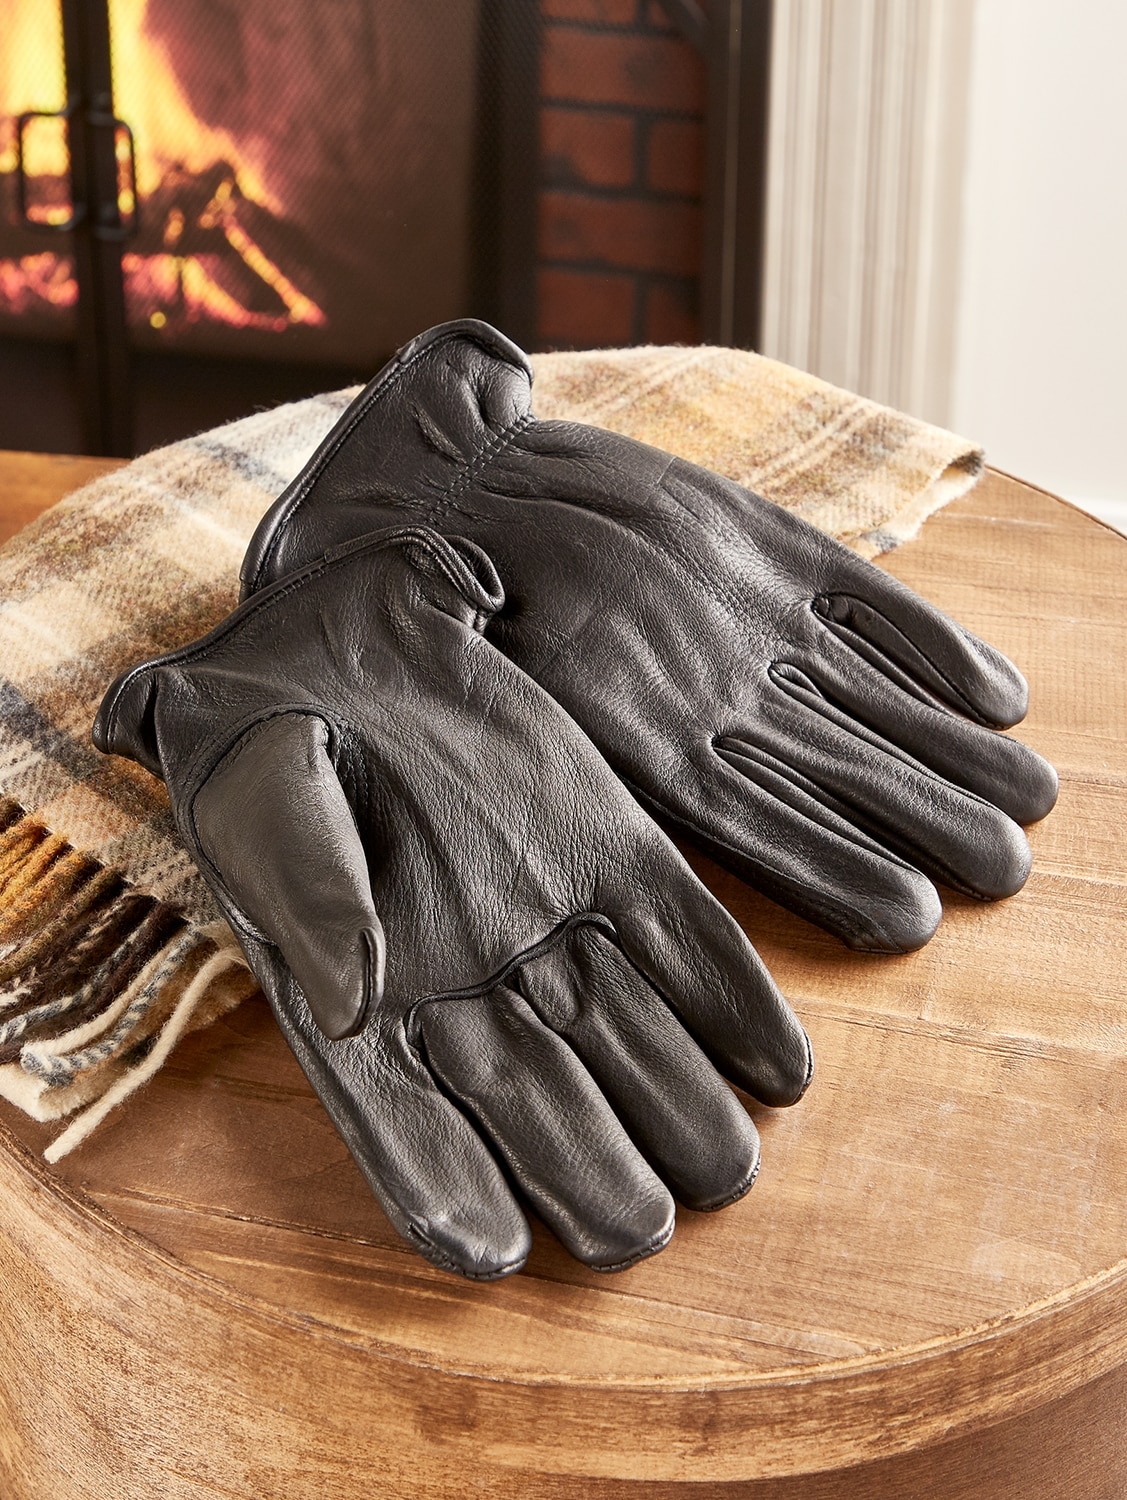 Leather Gloves for Men Deluxe Sheep and Deer Skin Leather Men’s Gloves Lined Driving or Daily Wears 